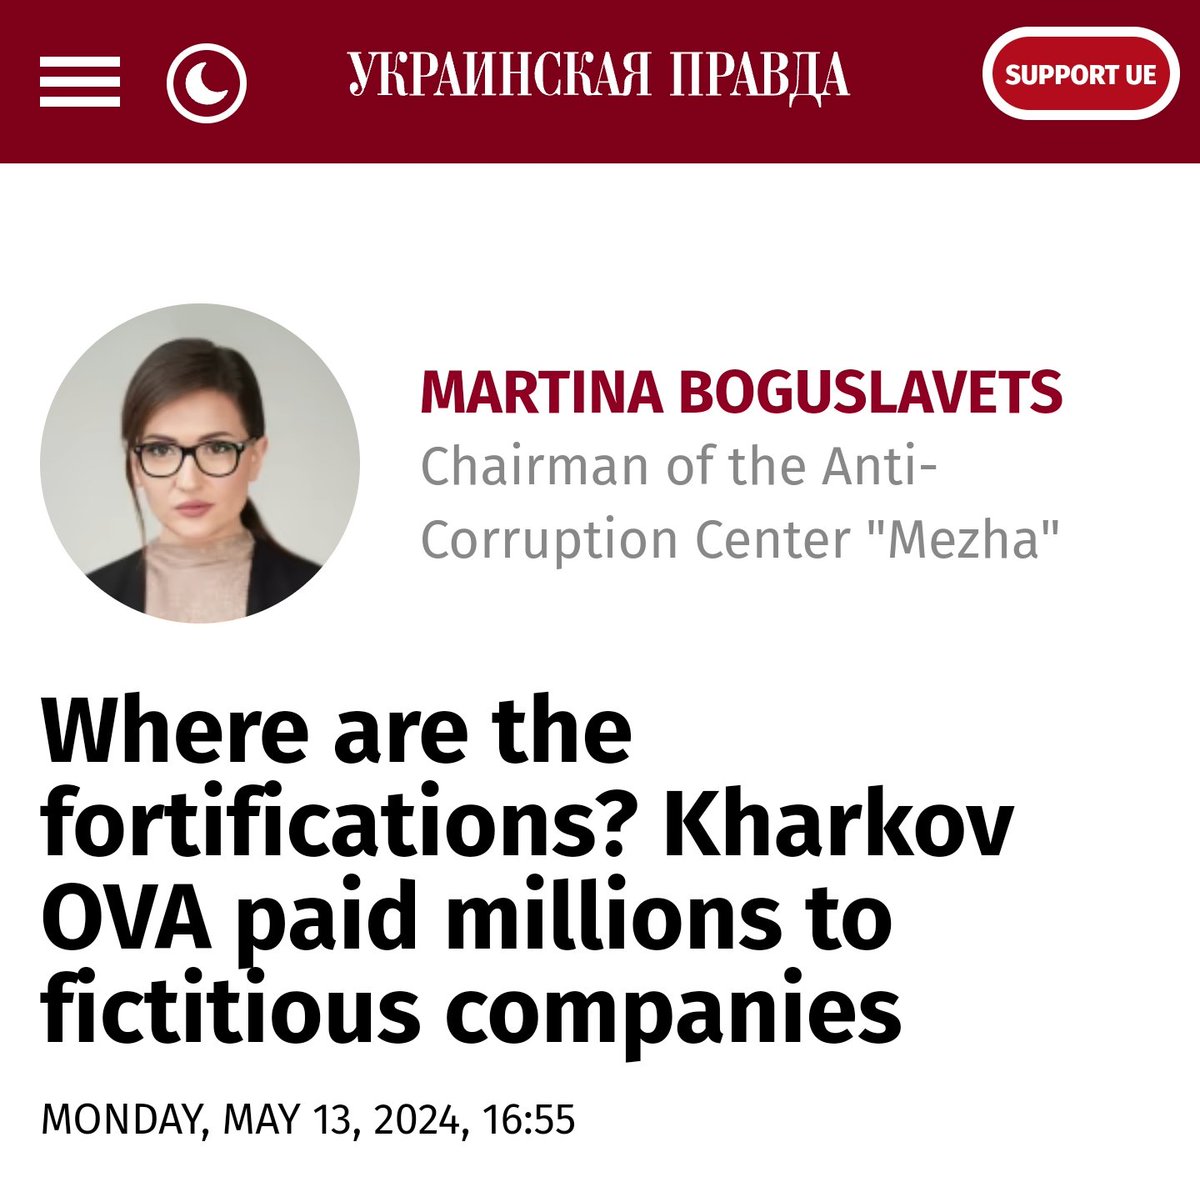 Hundreds of millions of hryvnias were stolen during the construction of fortifications in the Kharkov region. Multi-million dollar contracts for the construction of fortifications, for which a total of 7 billion hryvnias were spent there, were transferred to fictitious companies.